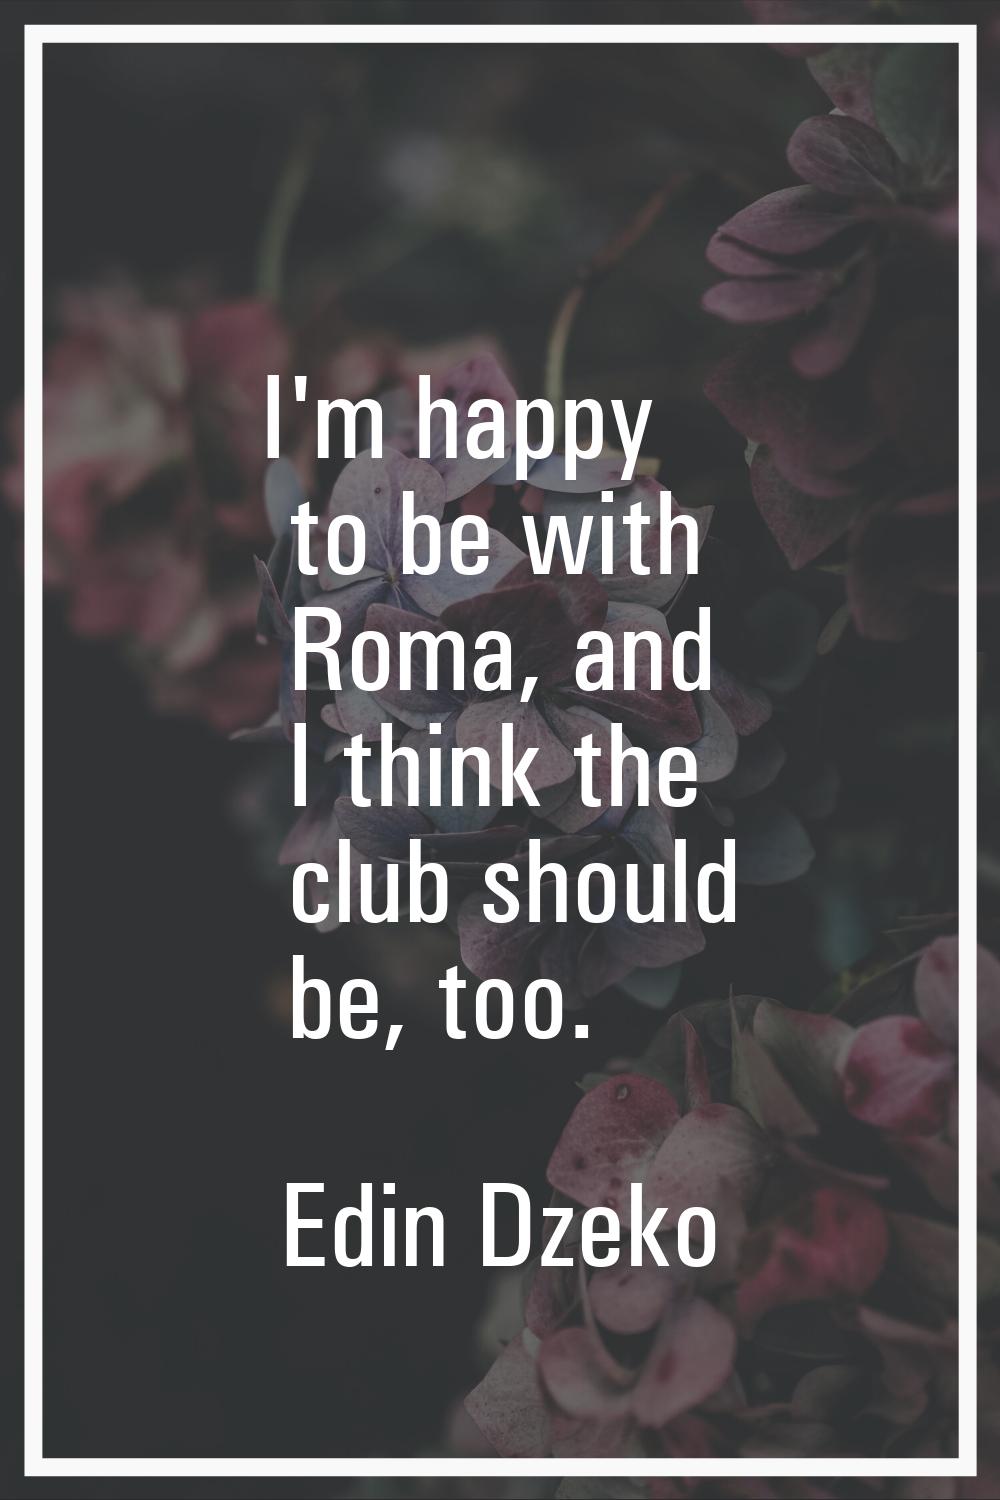 I'm happy to be with Roma, and I think the club should be, too.